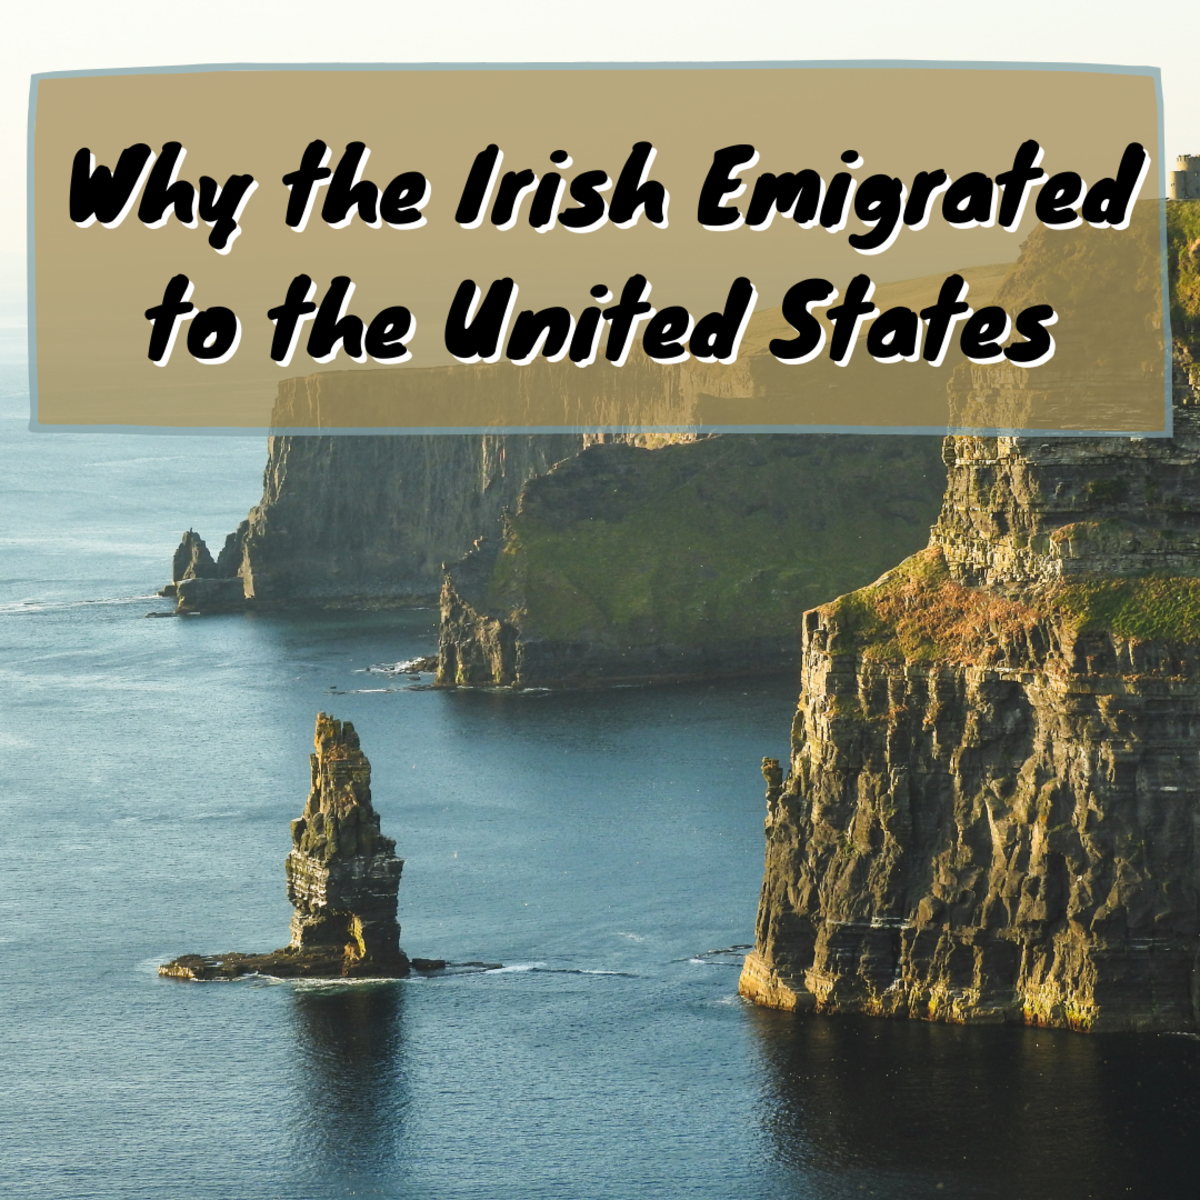 This article discusses the reasons behind the two great Irish migrations to the United States in the 18th and 19th centuries. 